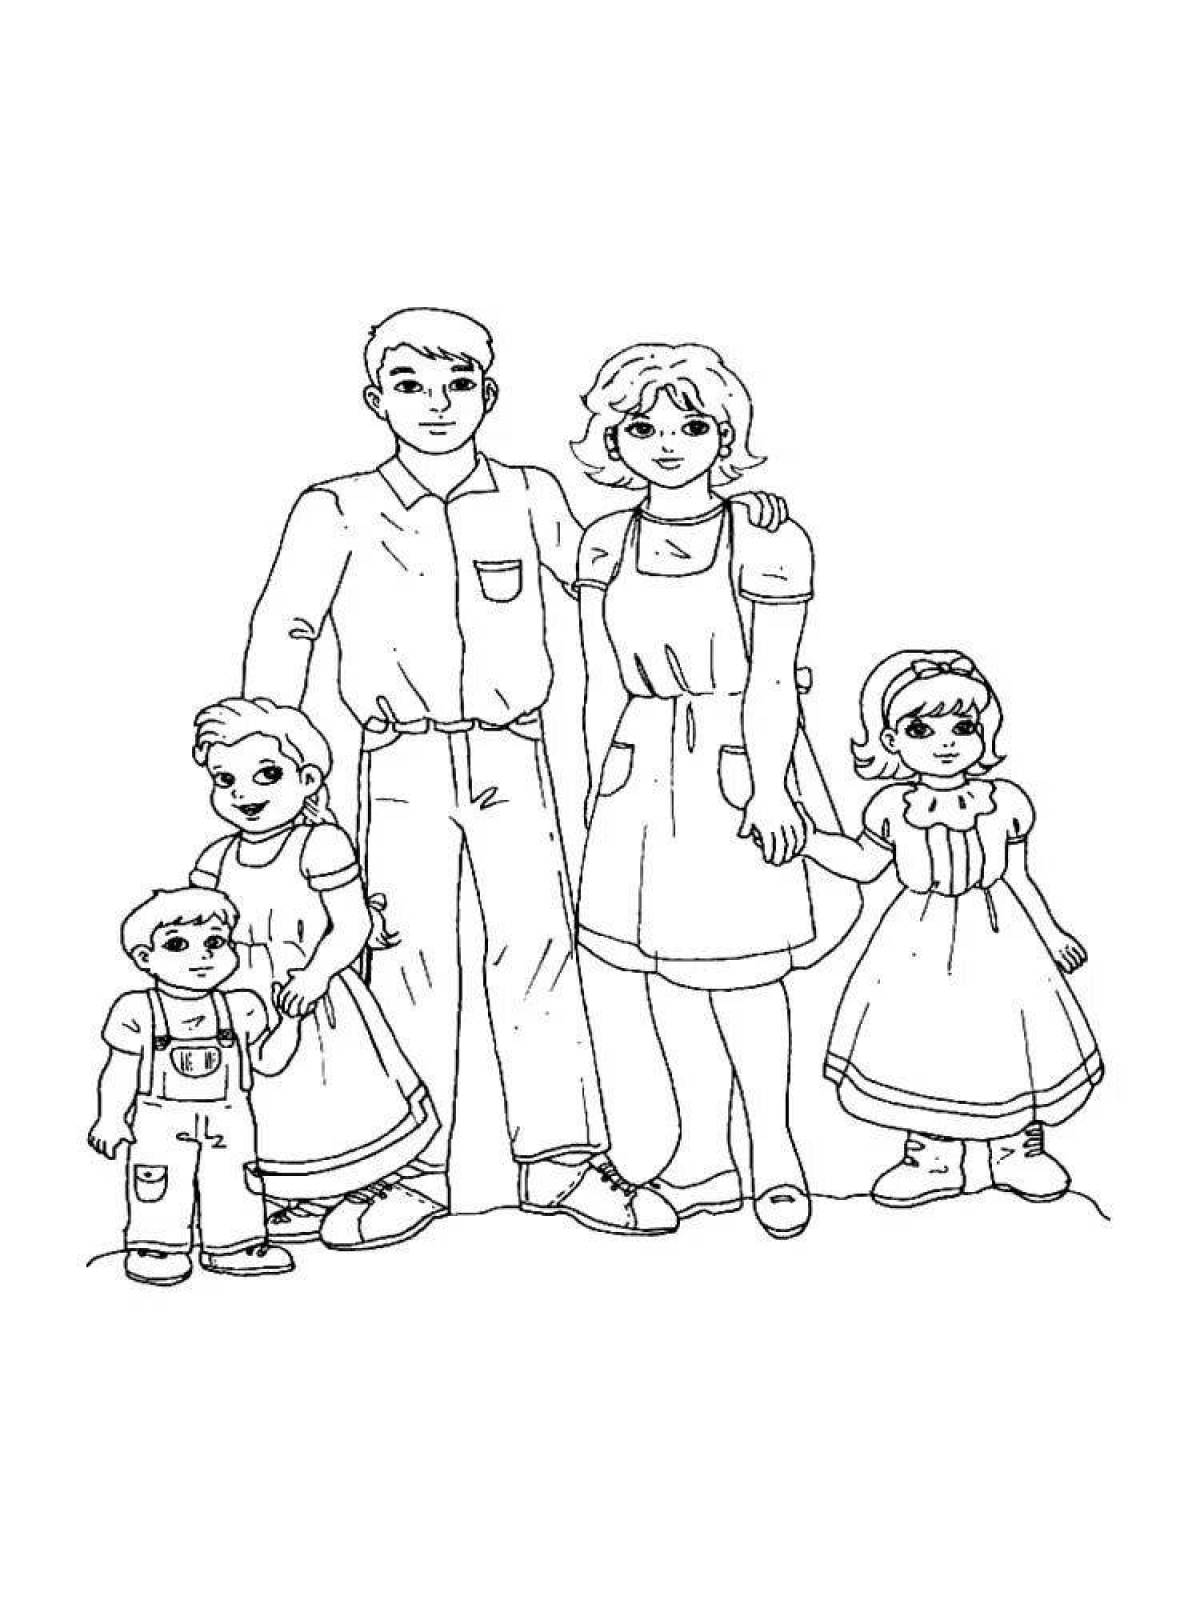 Fun family page drawing